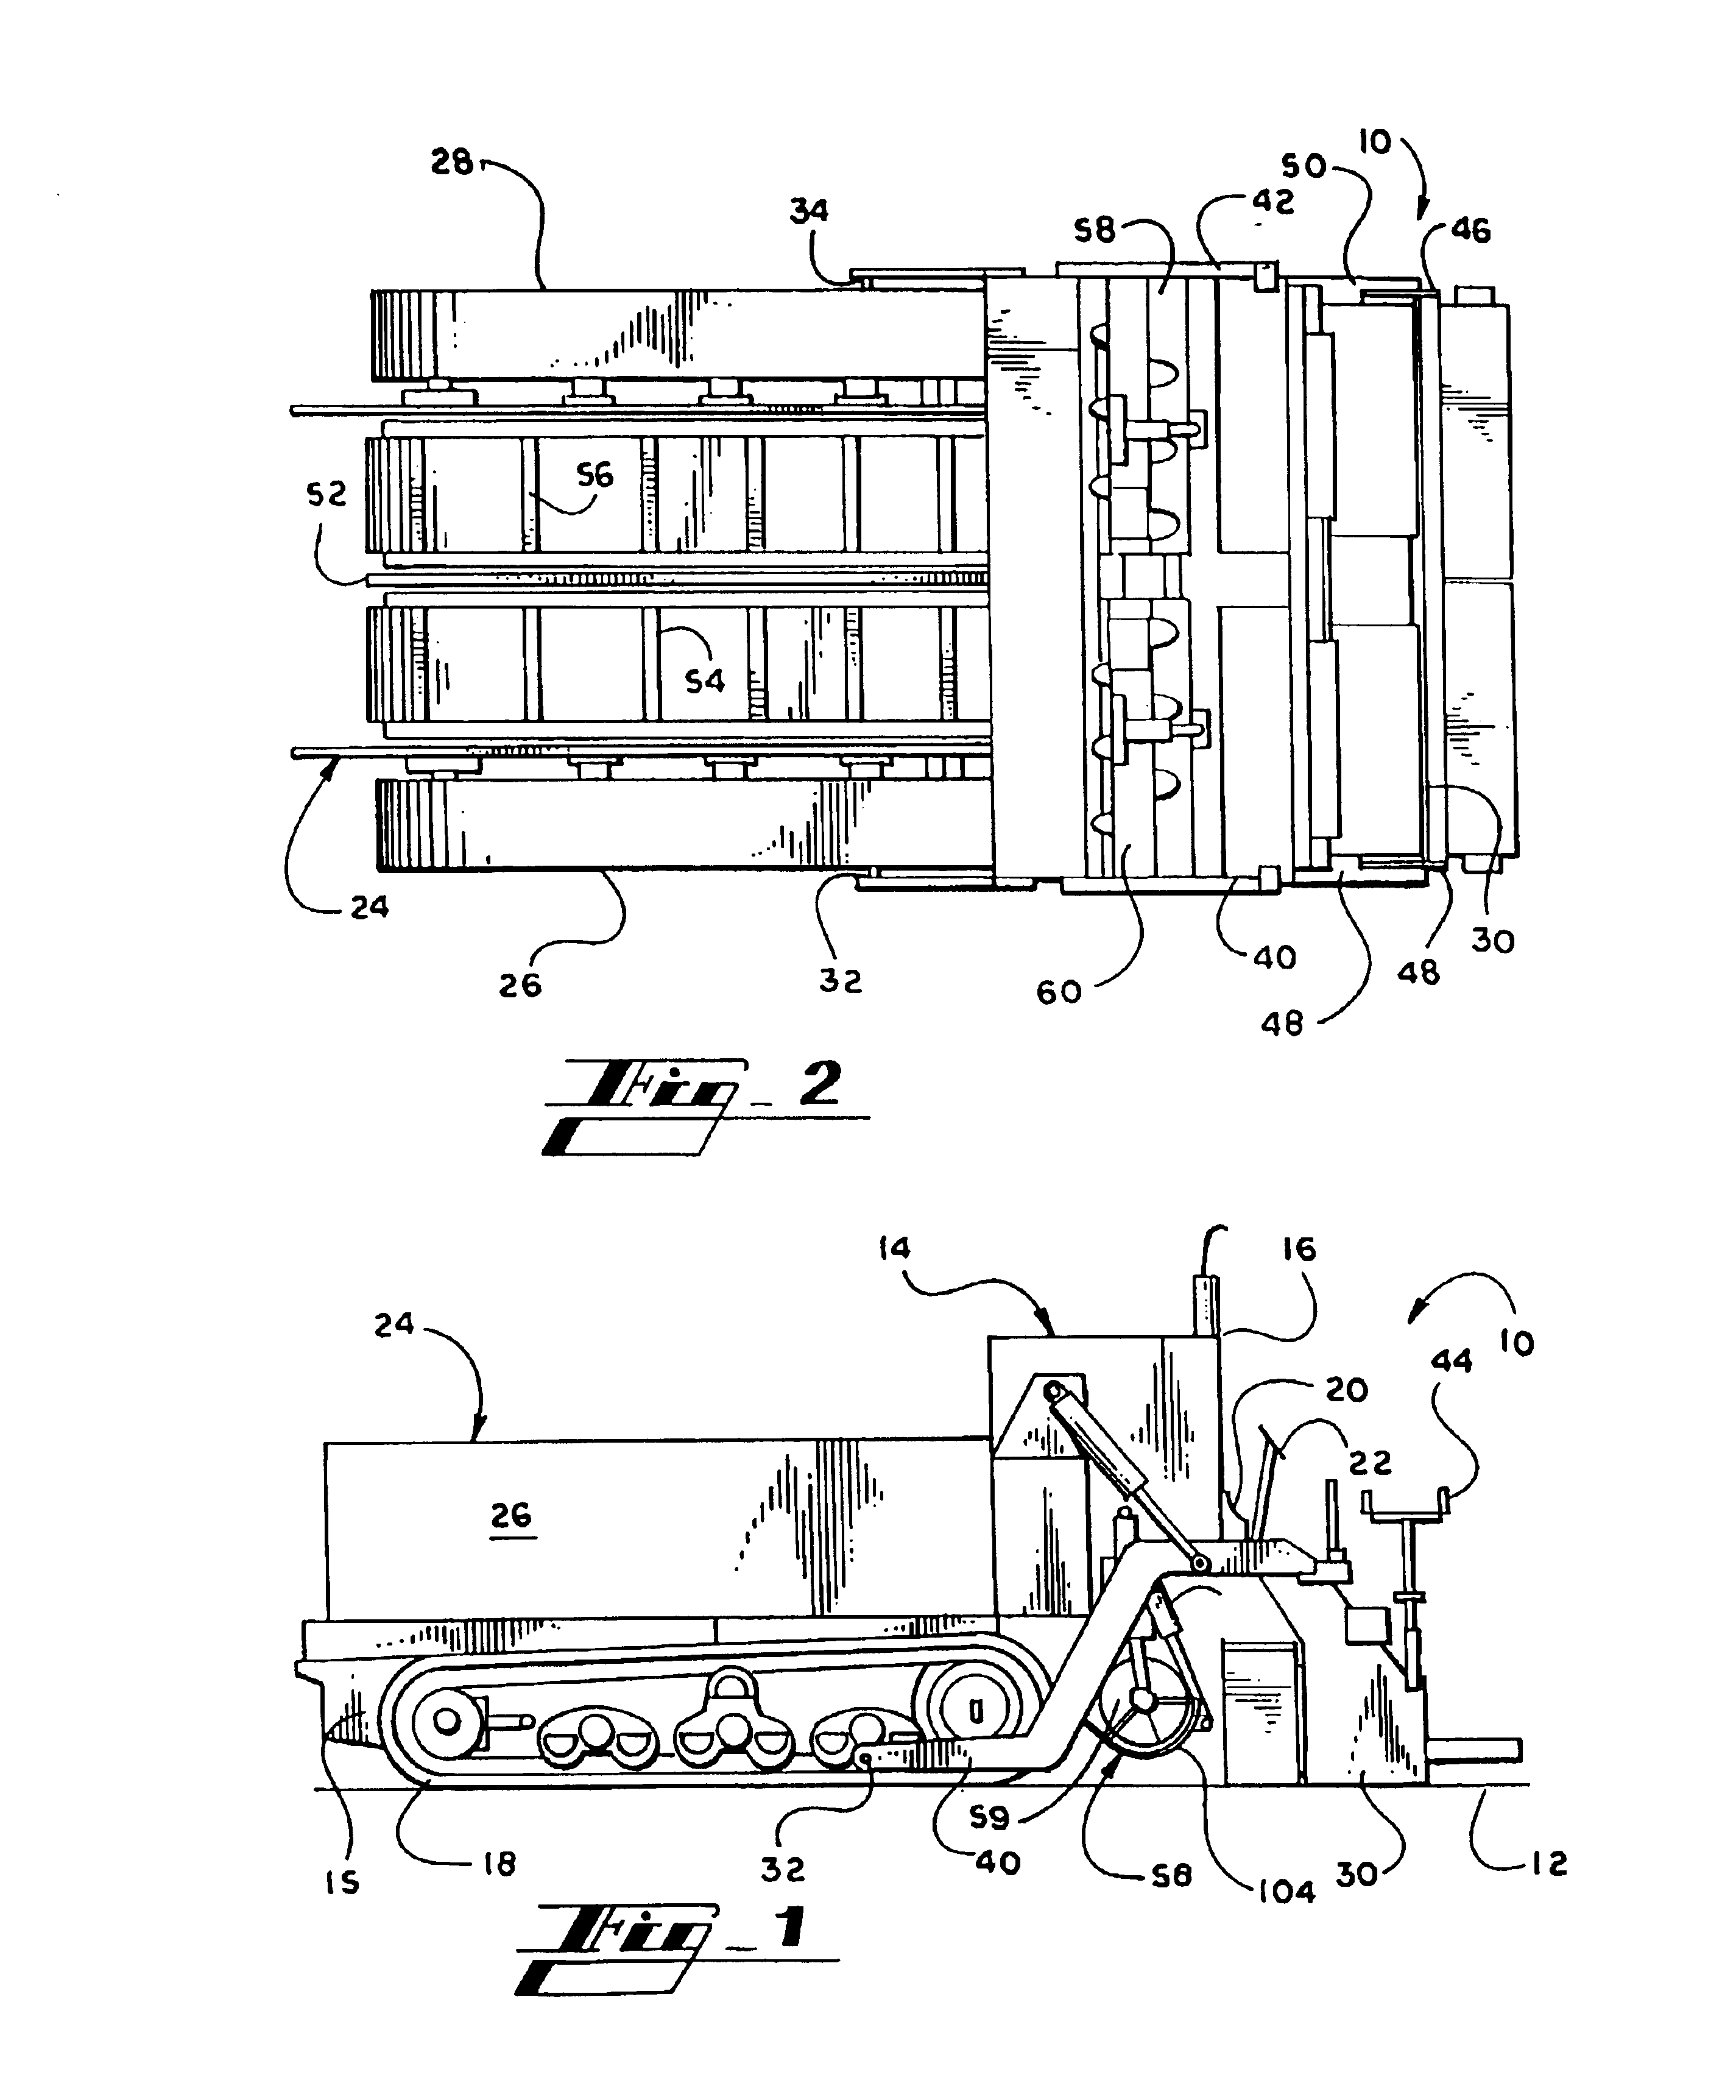 Cut off and strike off mechanism for a paving machine